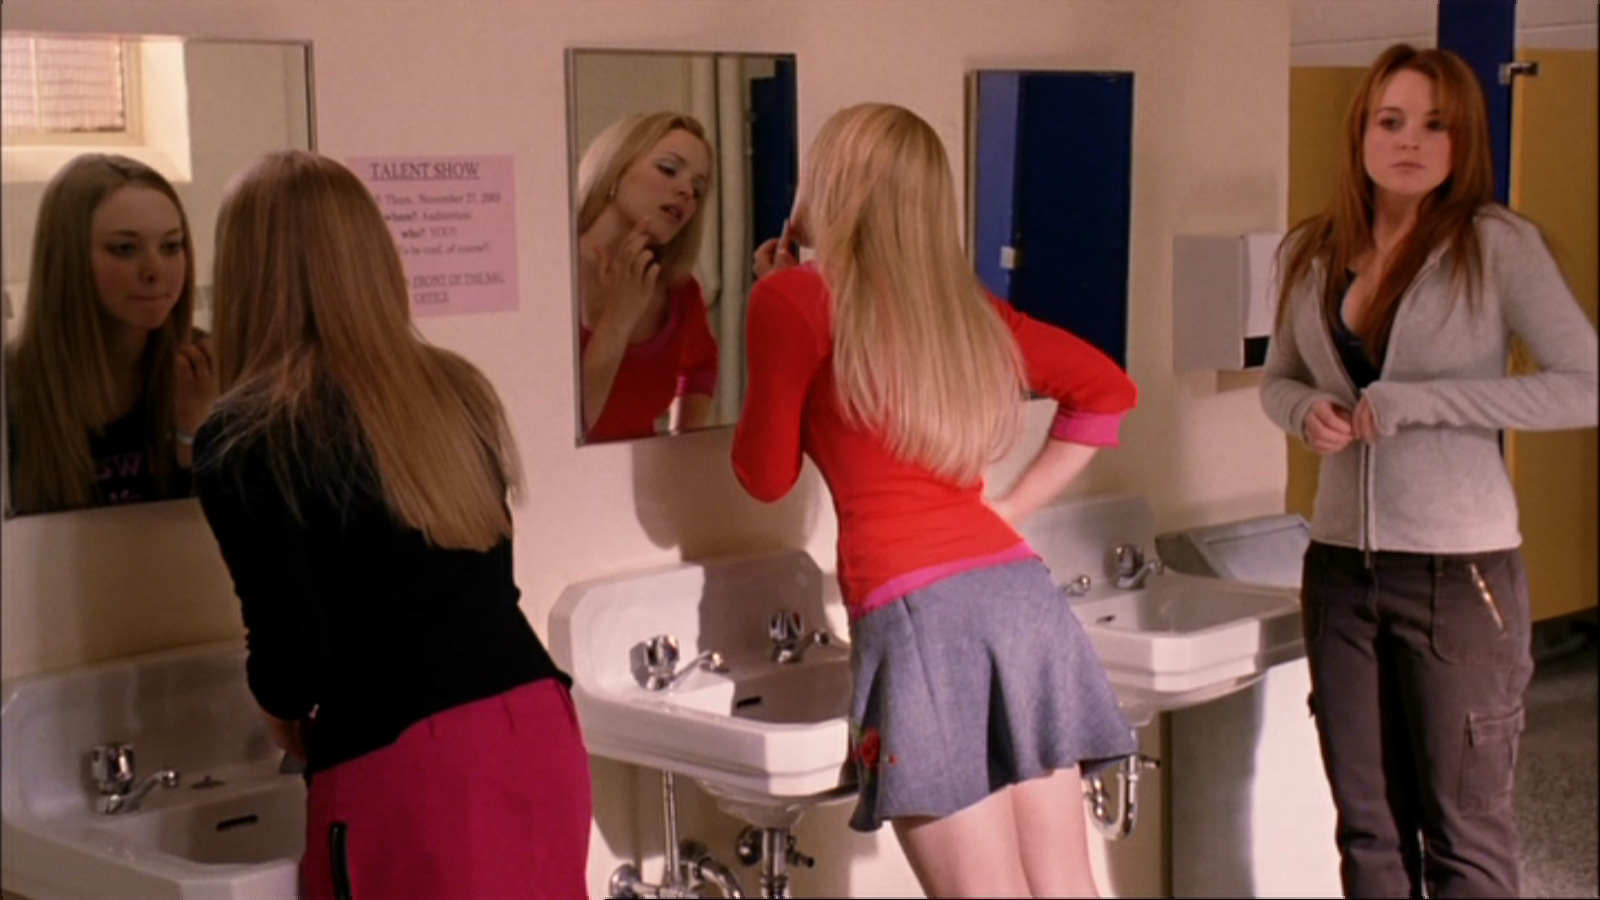 Screencap from the 2005 movie - 'Mean Girls'. 